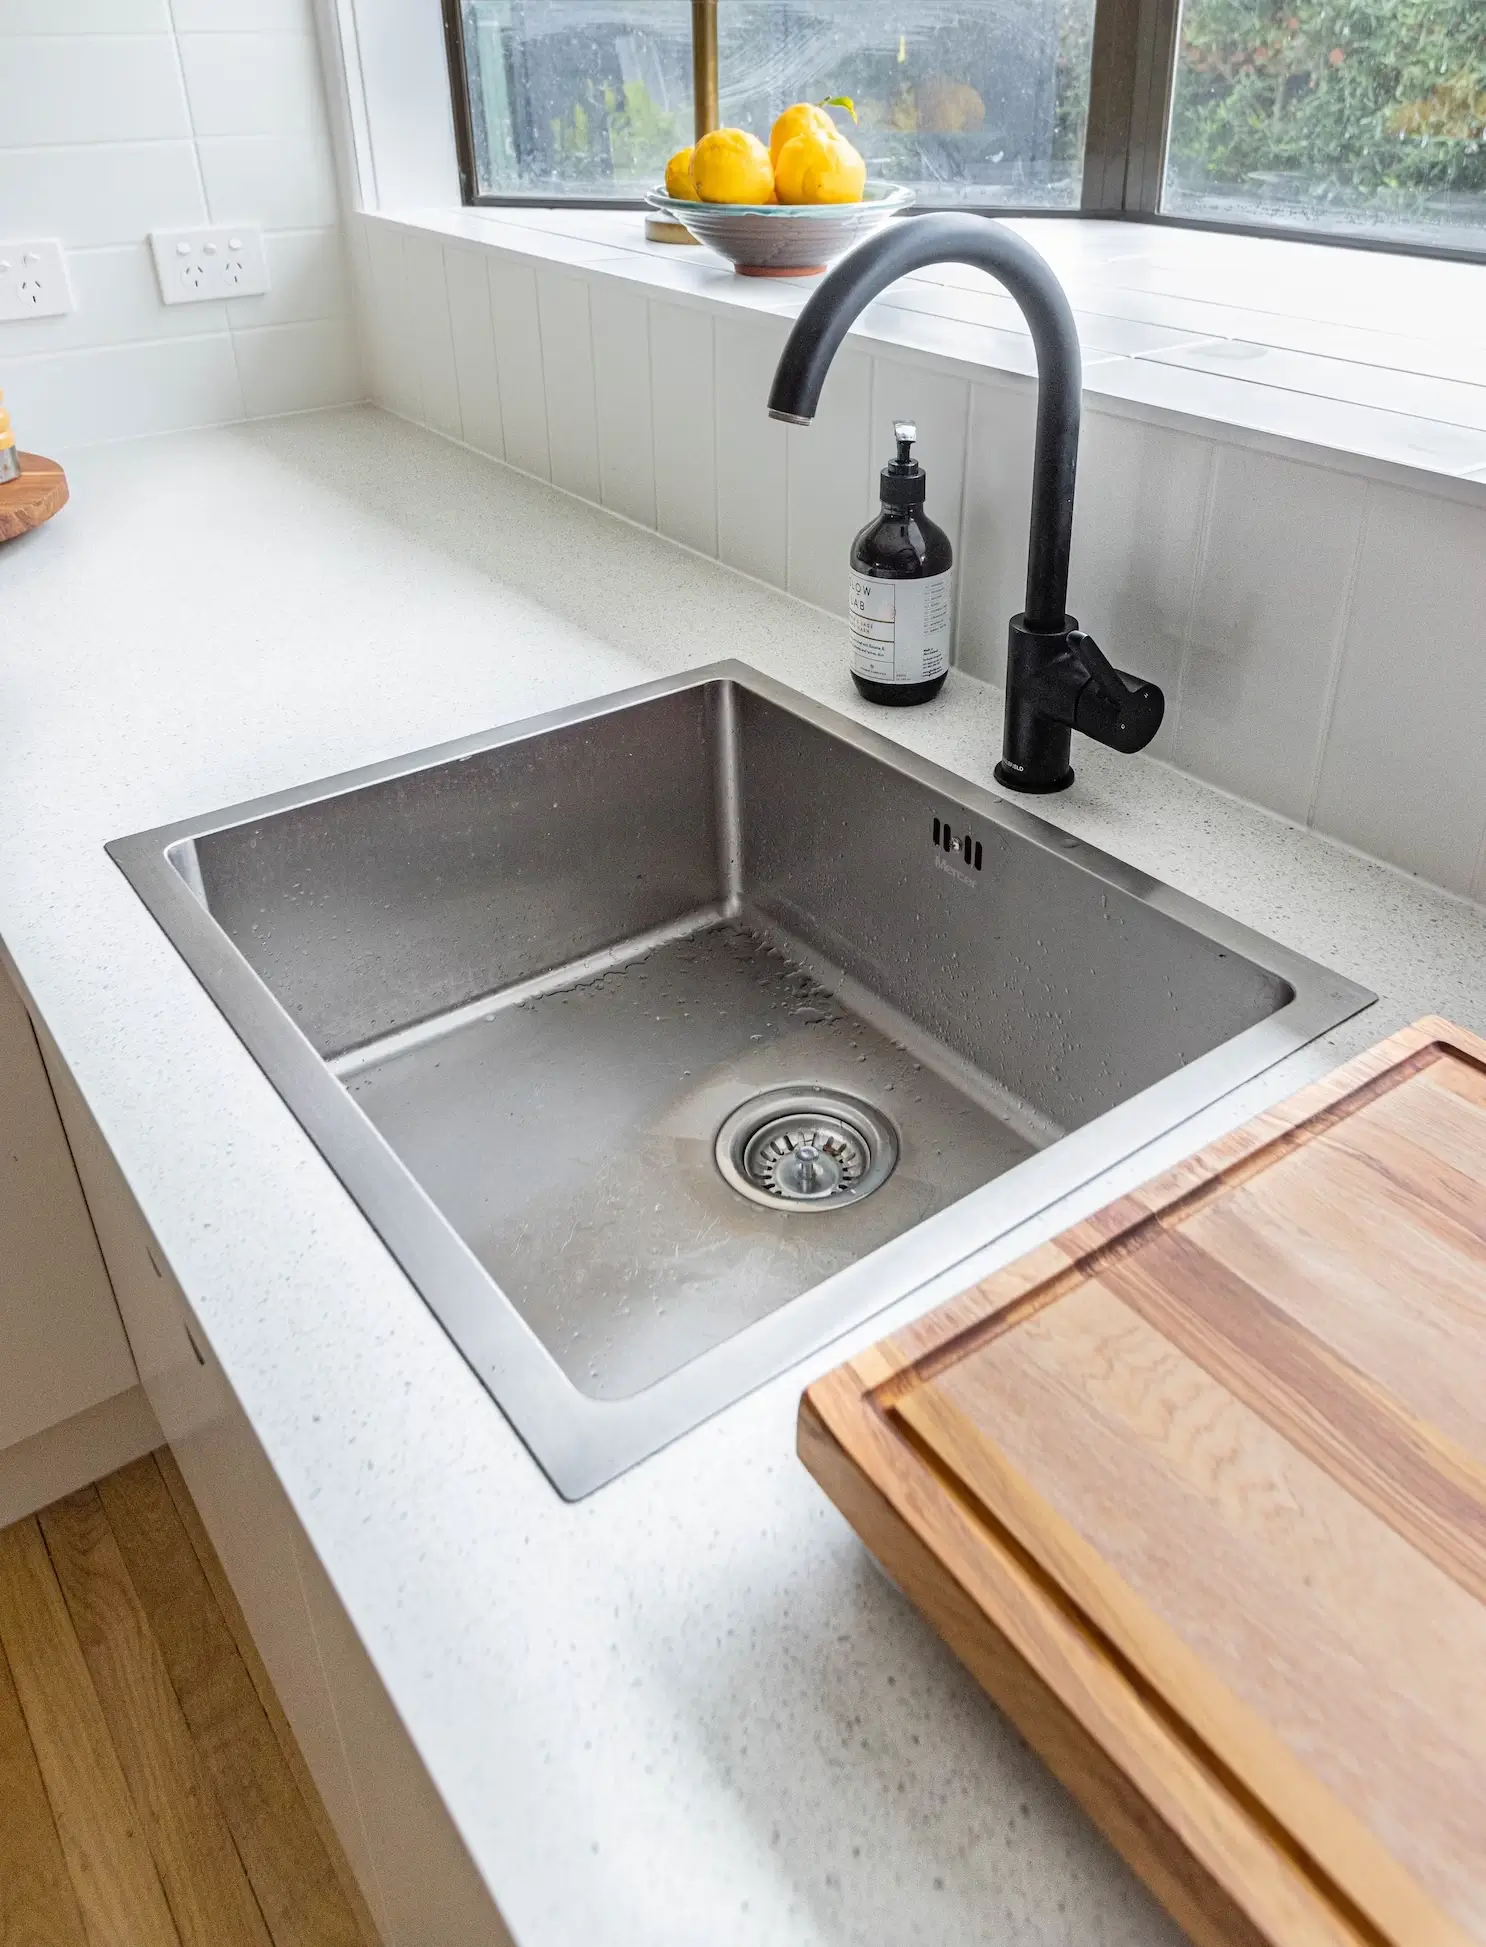 A stainless steel sink installed in a white countertop. There is a bowl of lemons set behind the sink and a window that looks out from the kitchen.